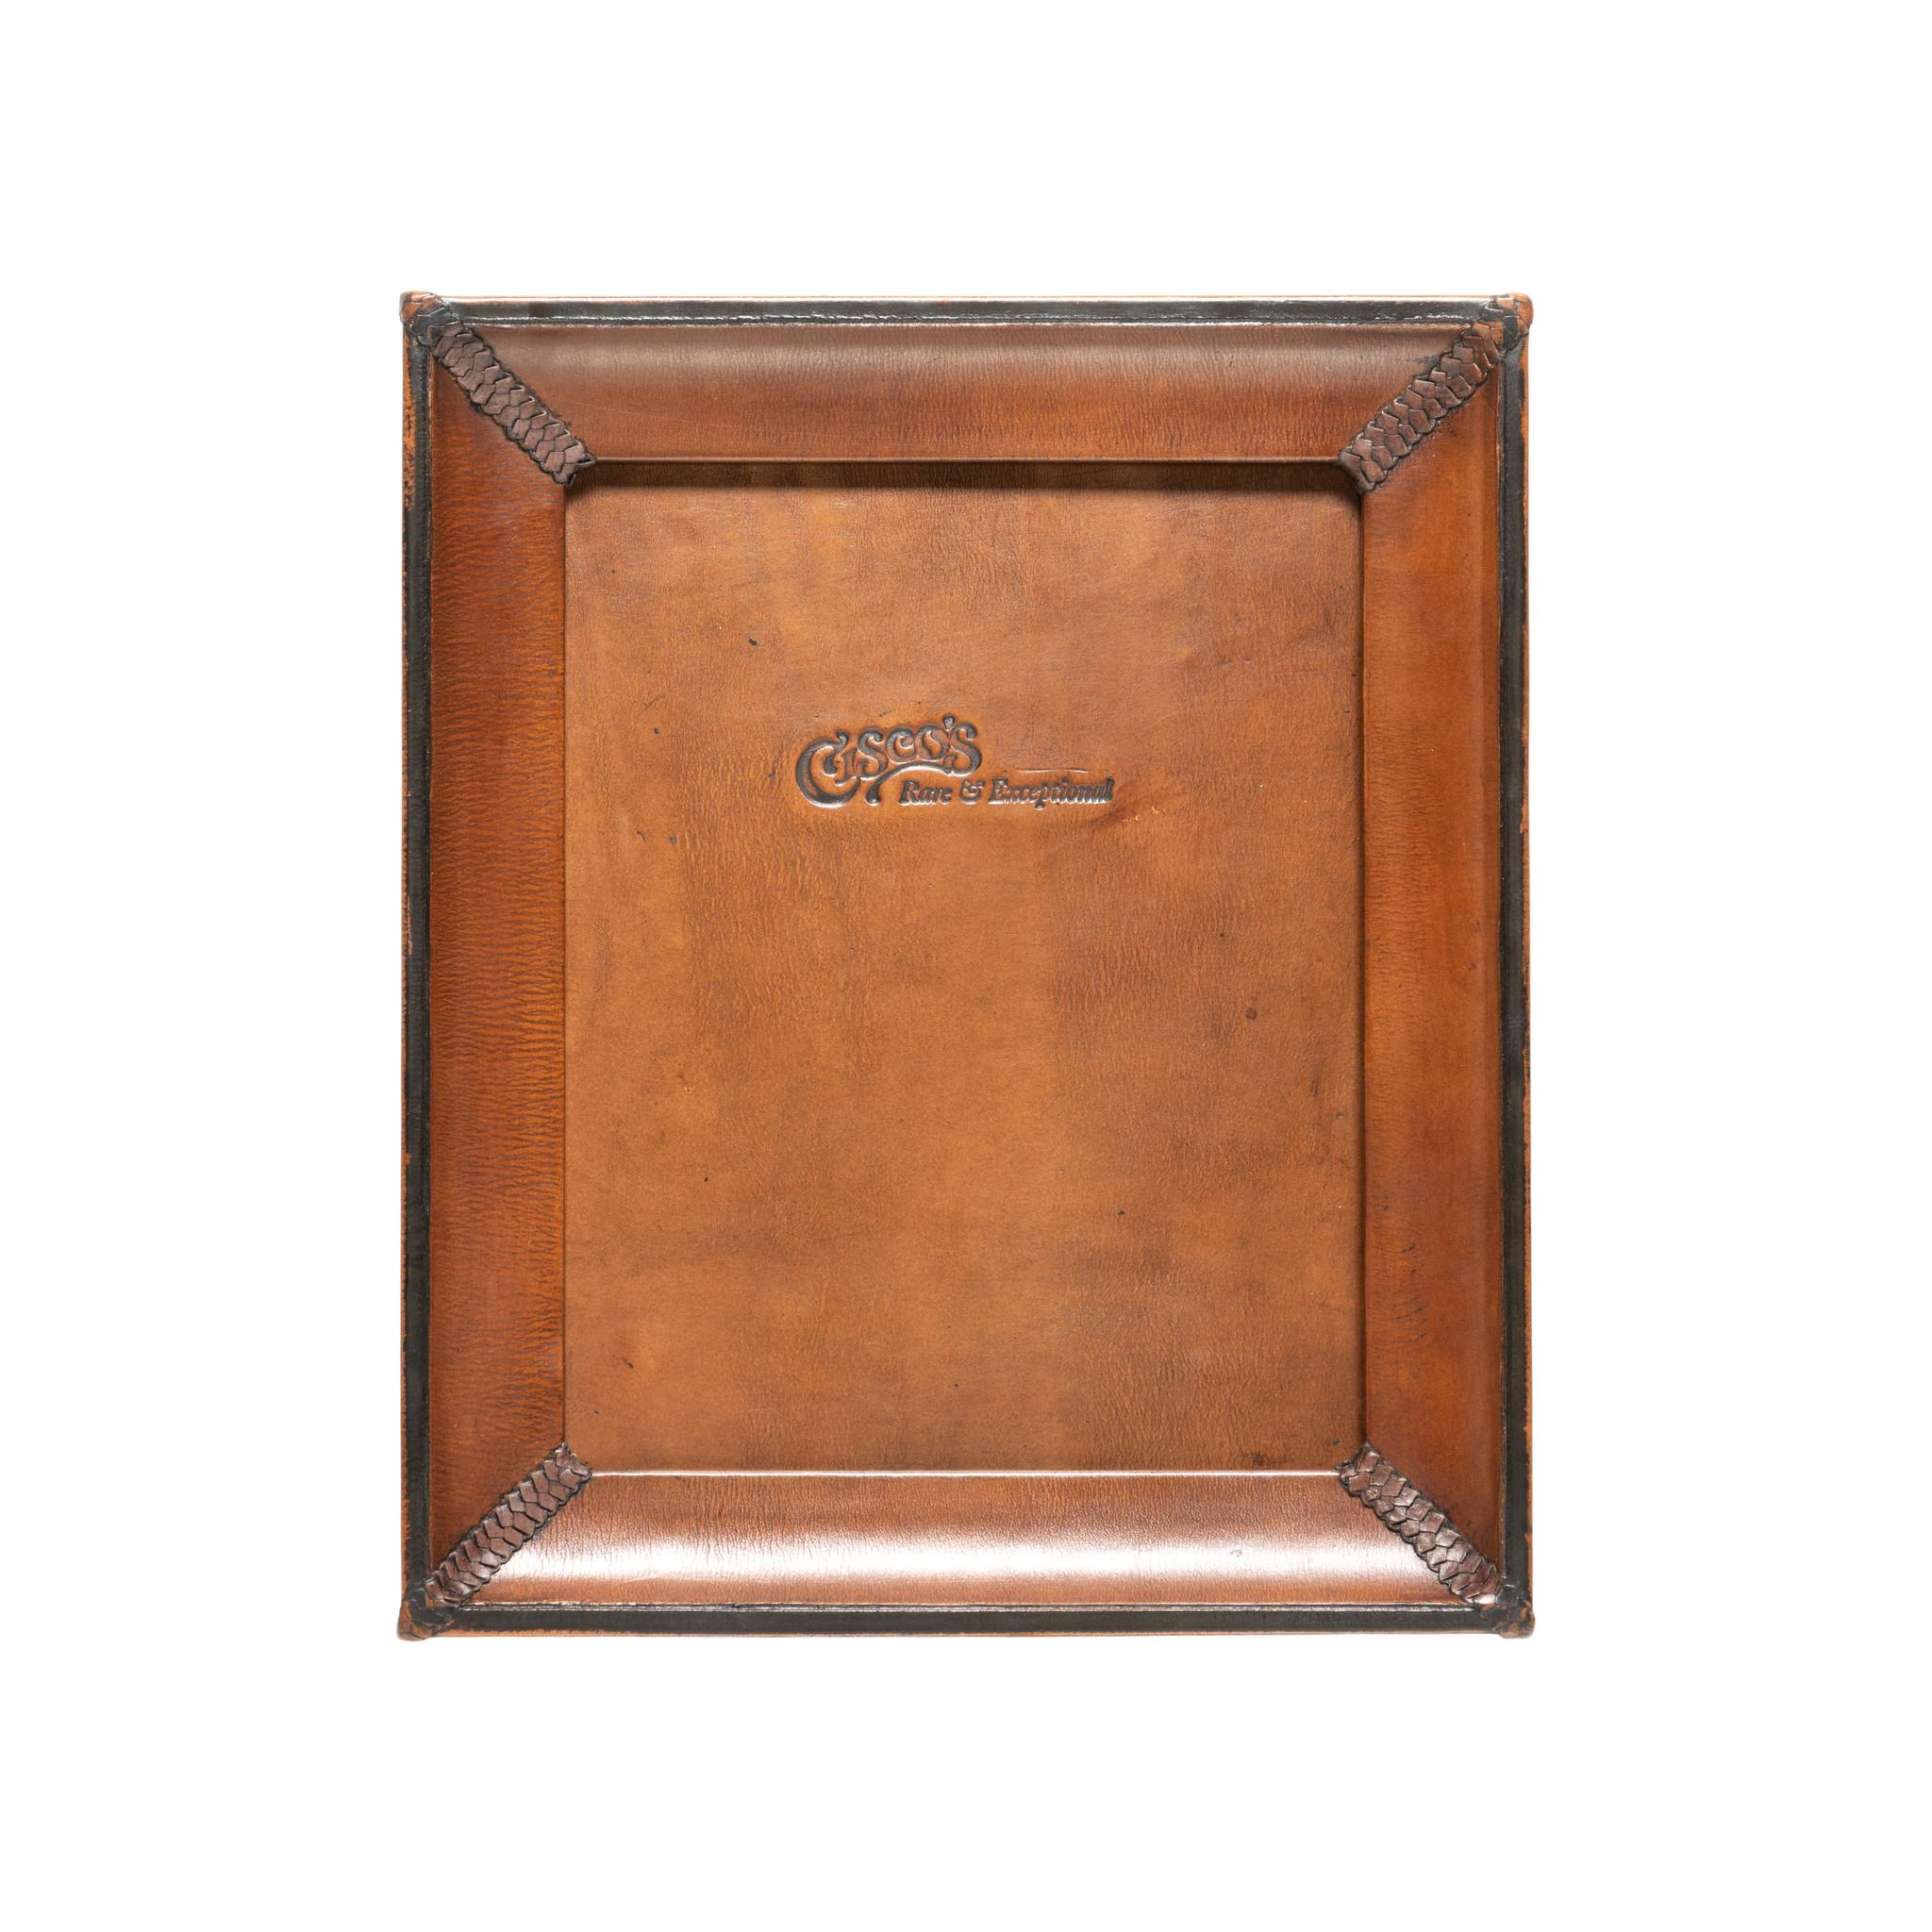 8x10 Medium Brown and Black Leather Tabletop Picture Frame - The Artisan In New Condition For Sale In Coeur d'Alene, ID